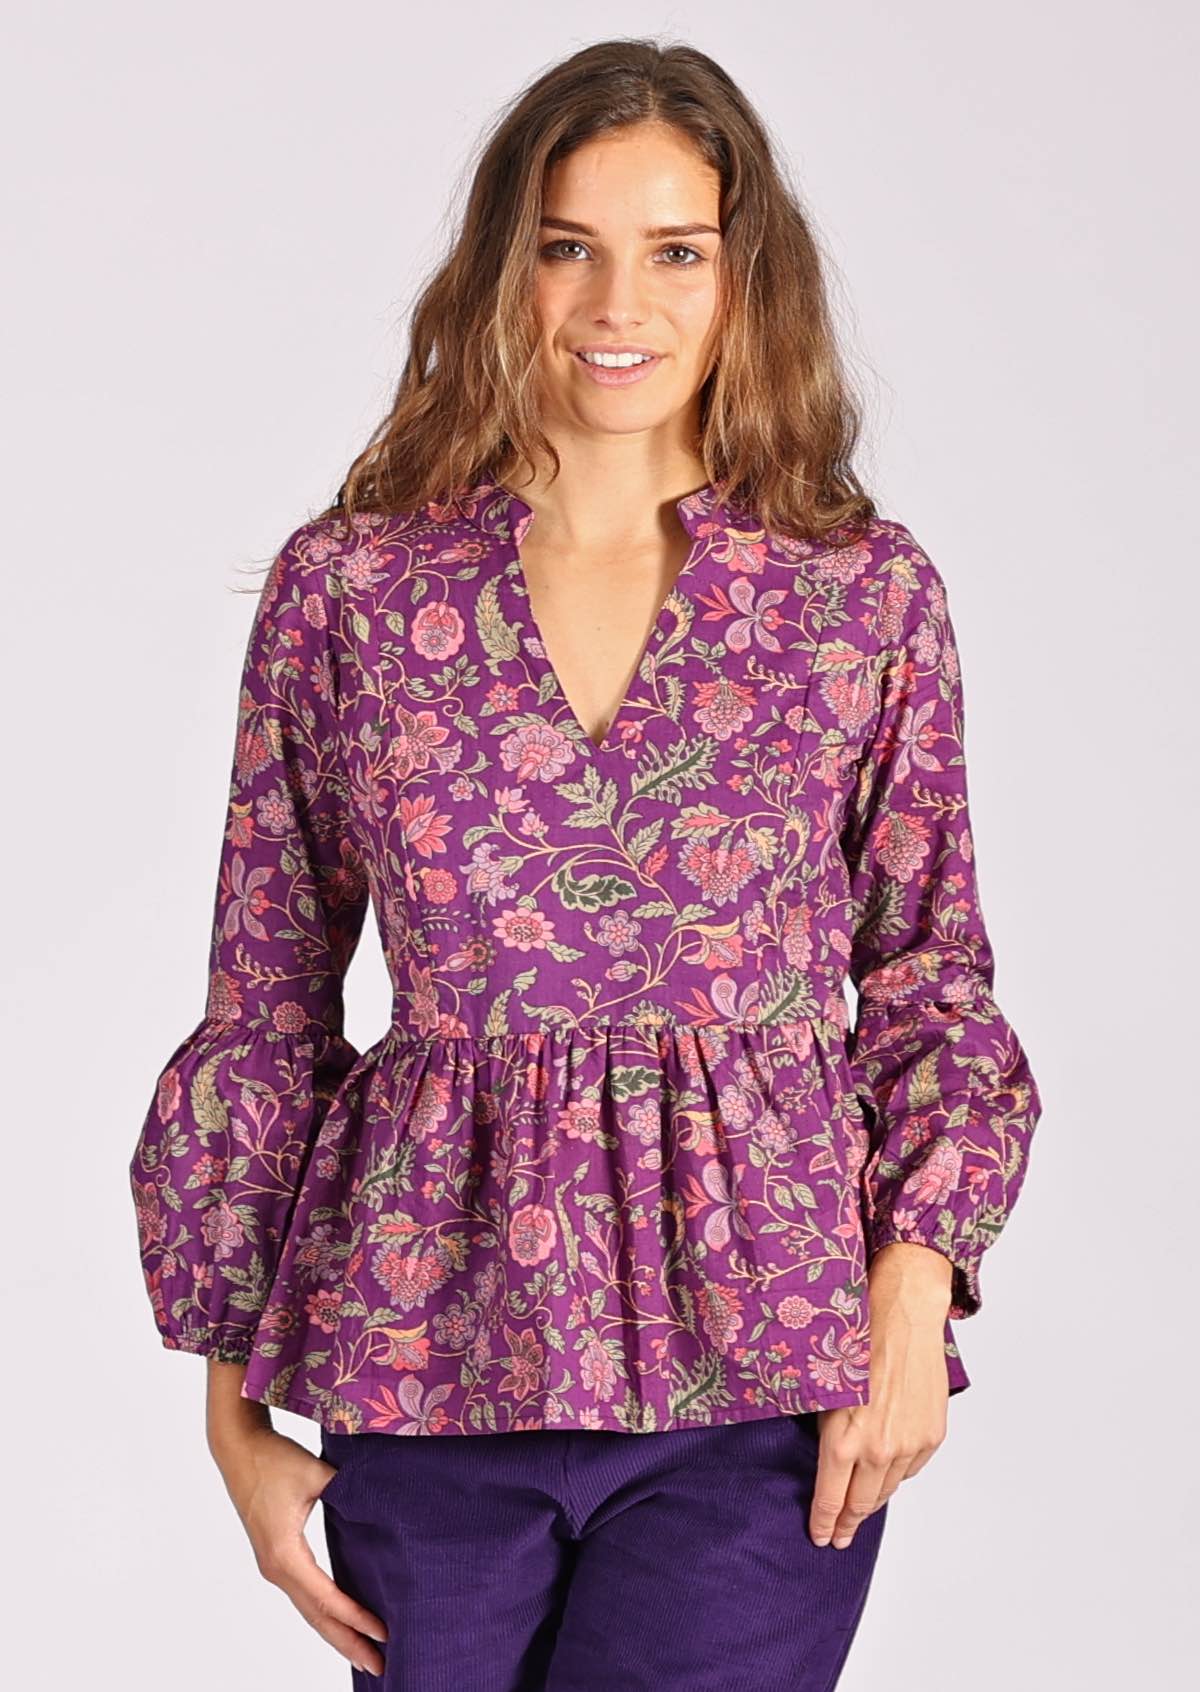 Purple floral print cotton peplum top with puffed sleeves and mandarin collar